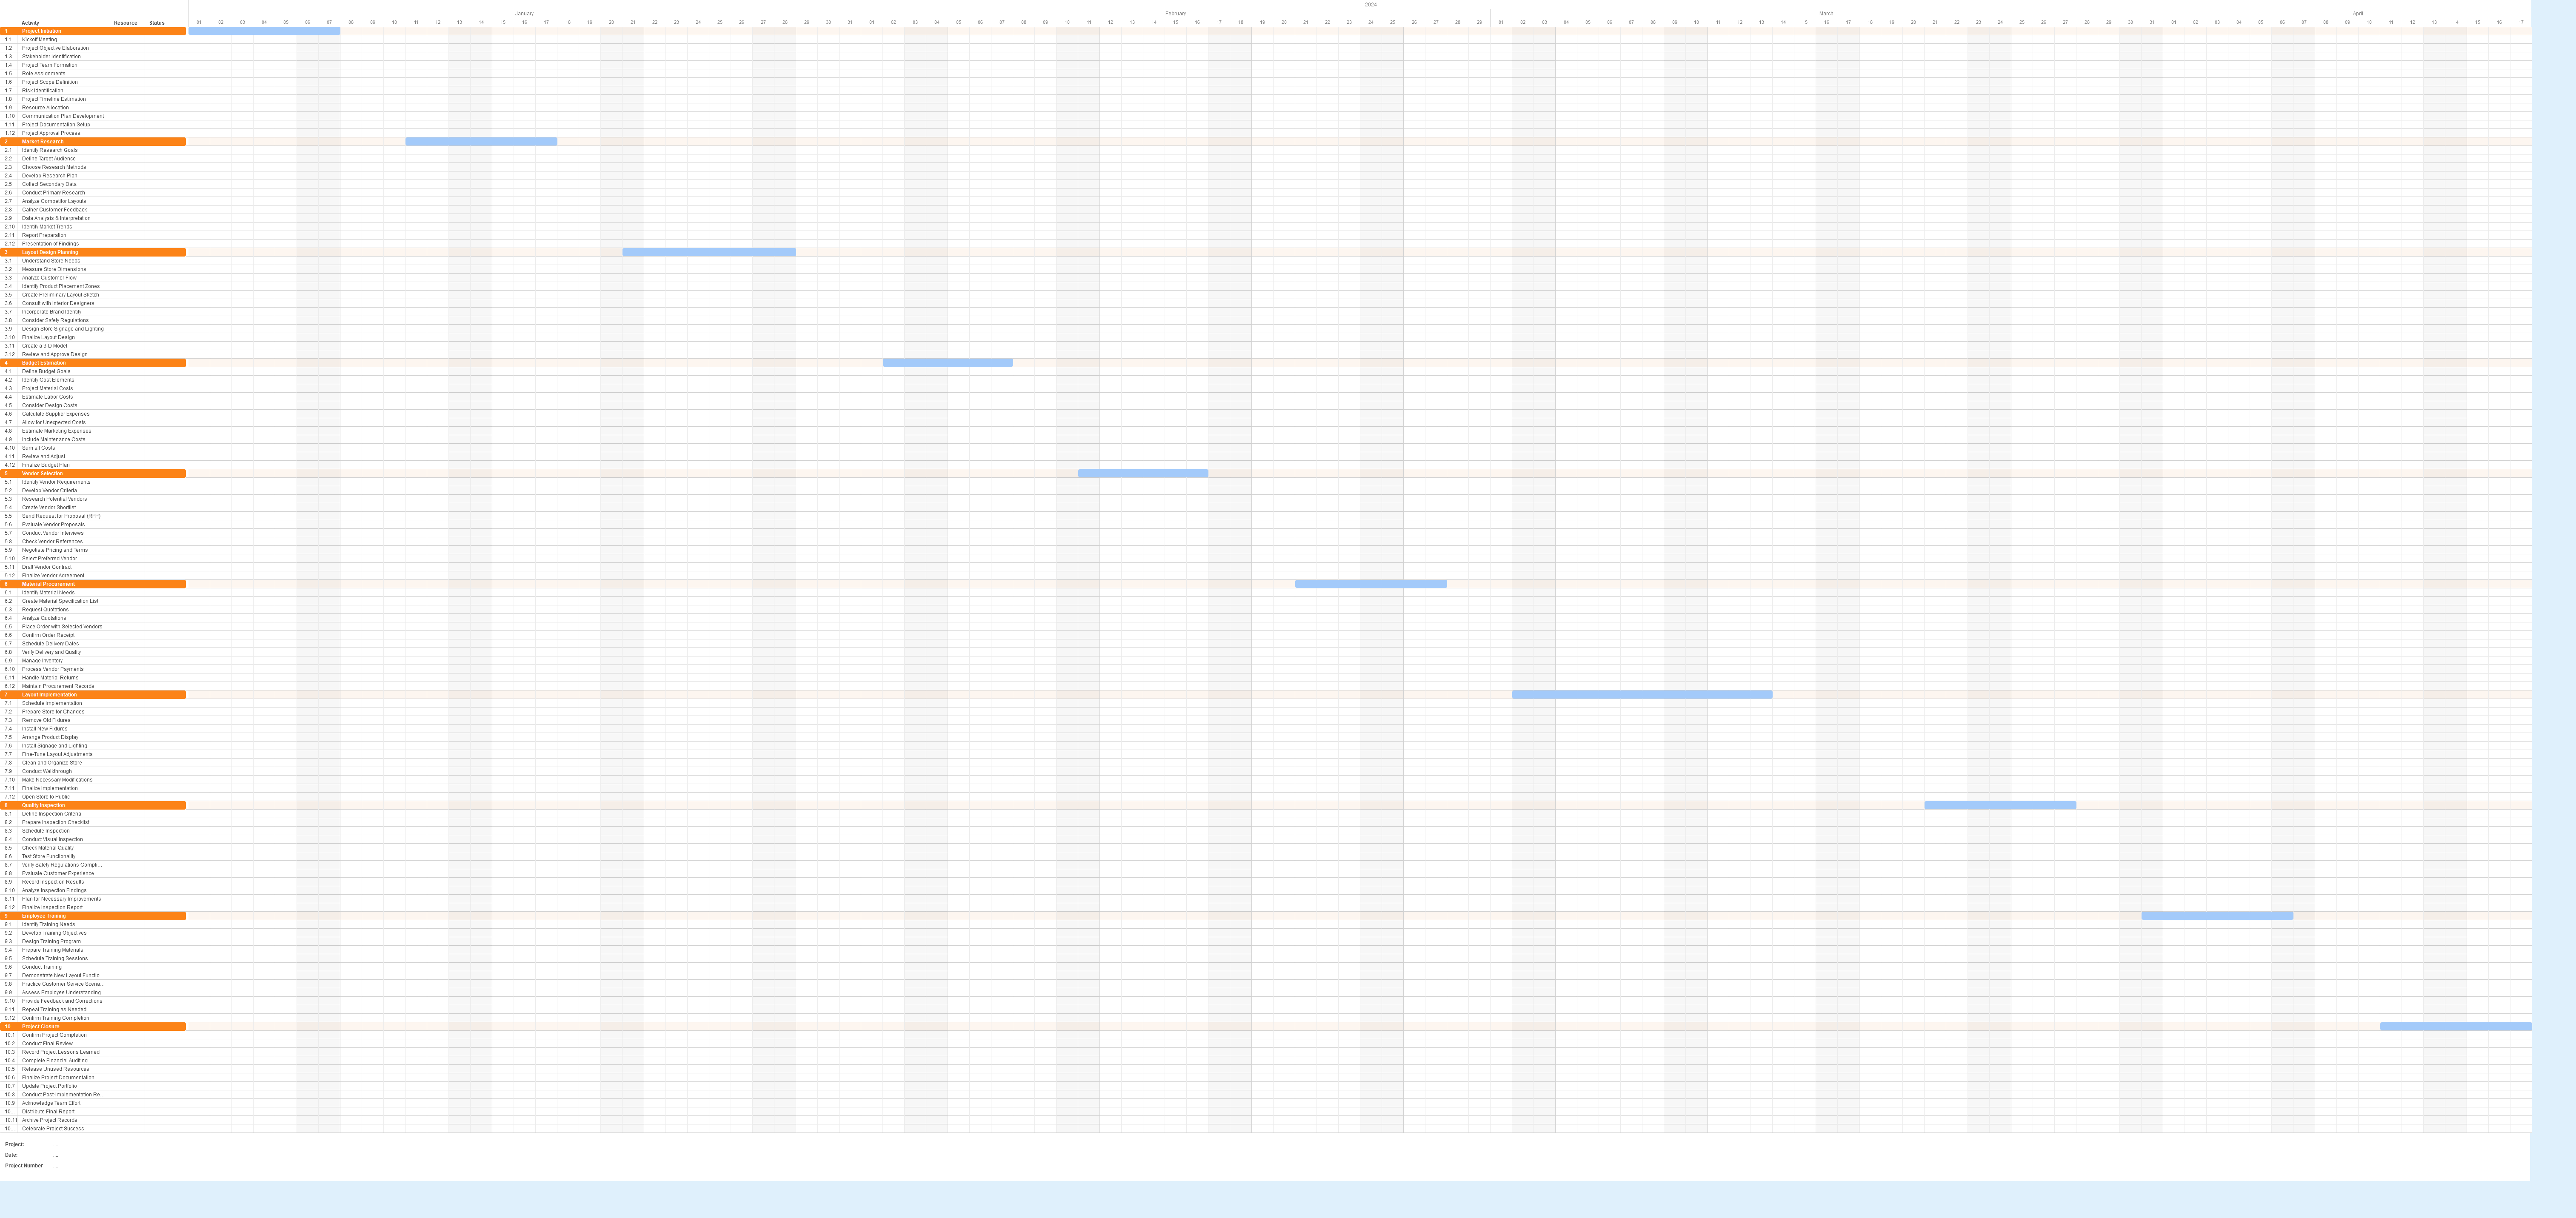 Gantt chart for a Retail Store Layout Update project